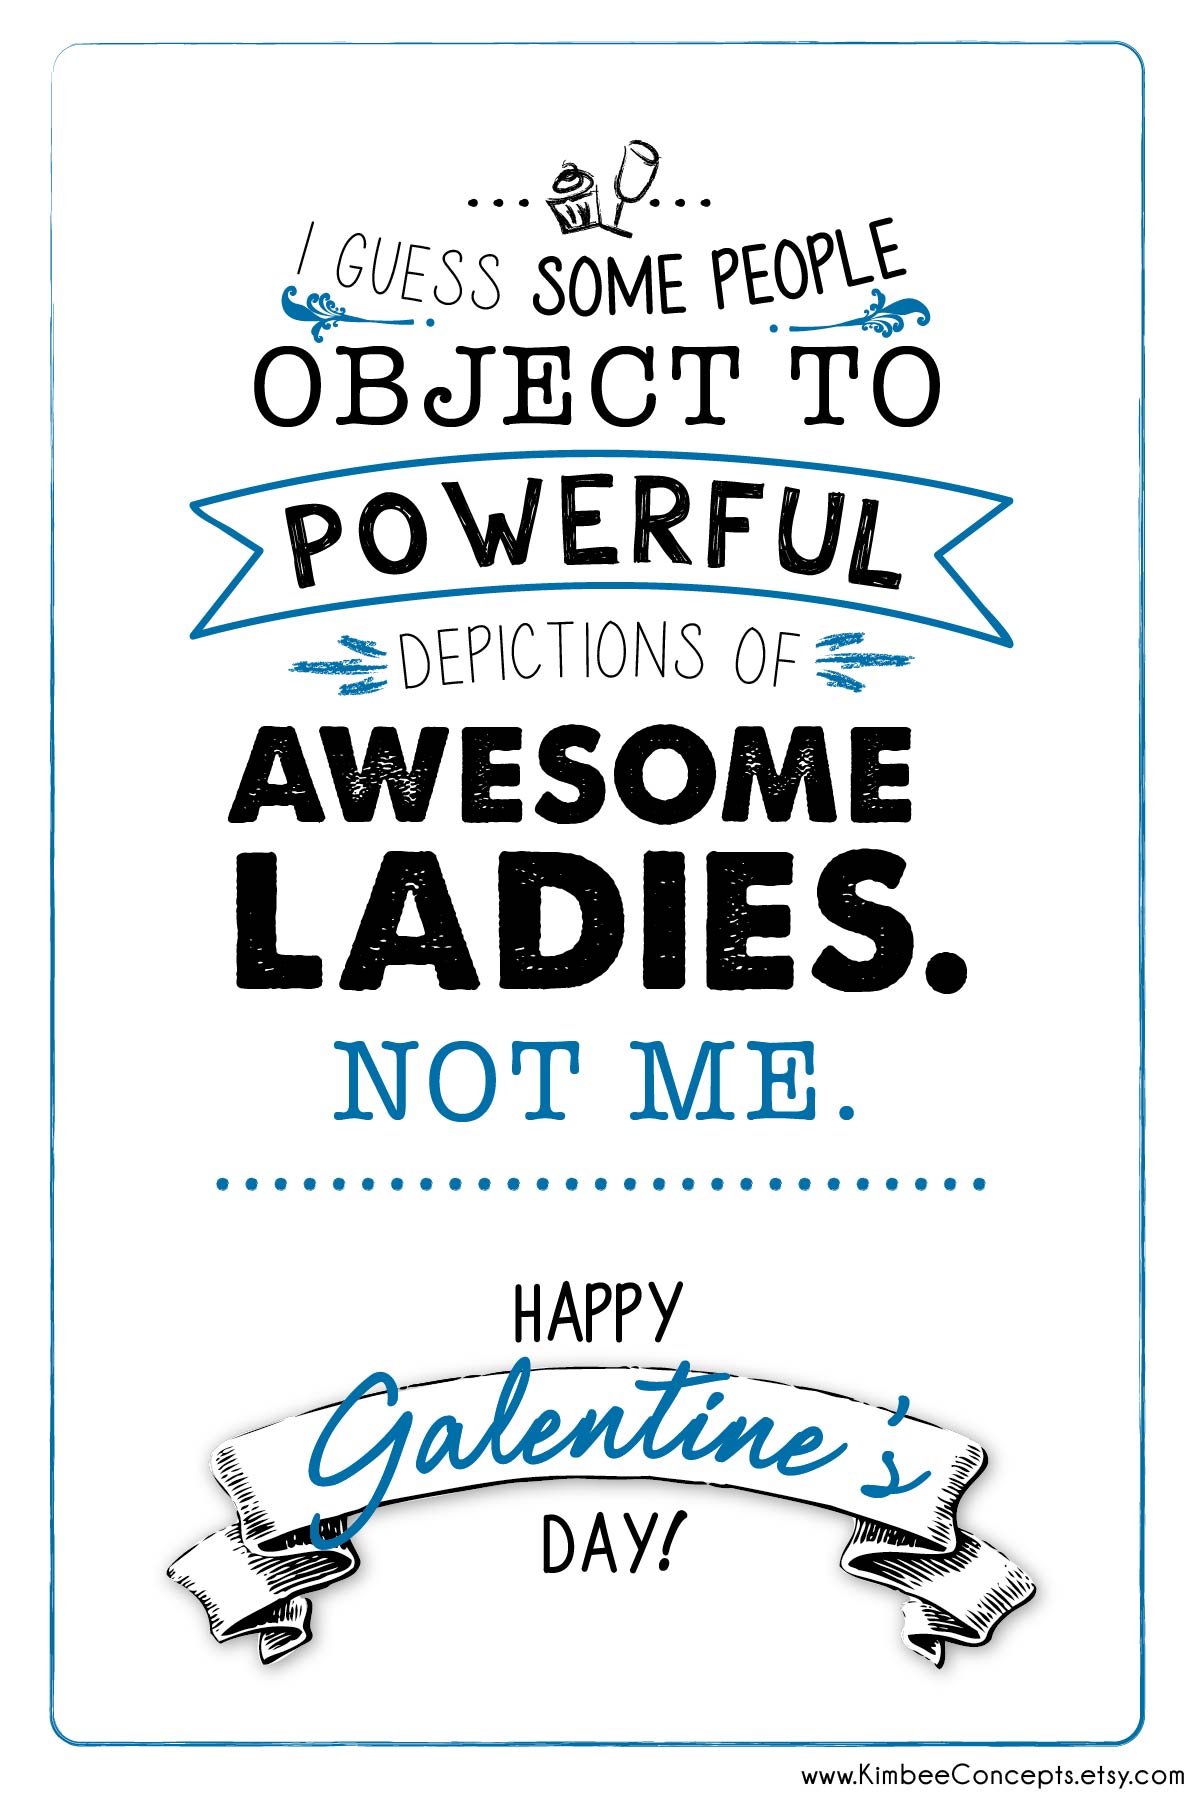 Free Printable Galentine s Day Cards For Your Lady Friends